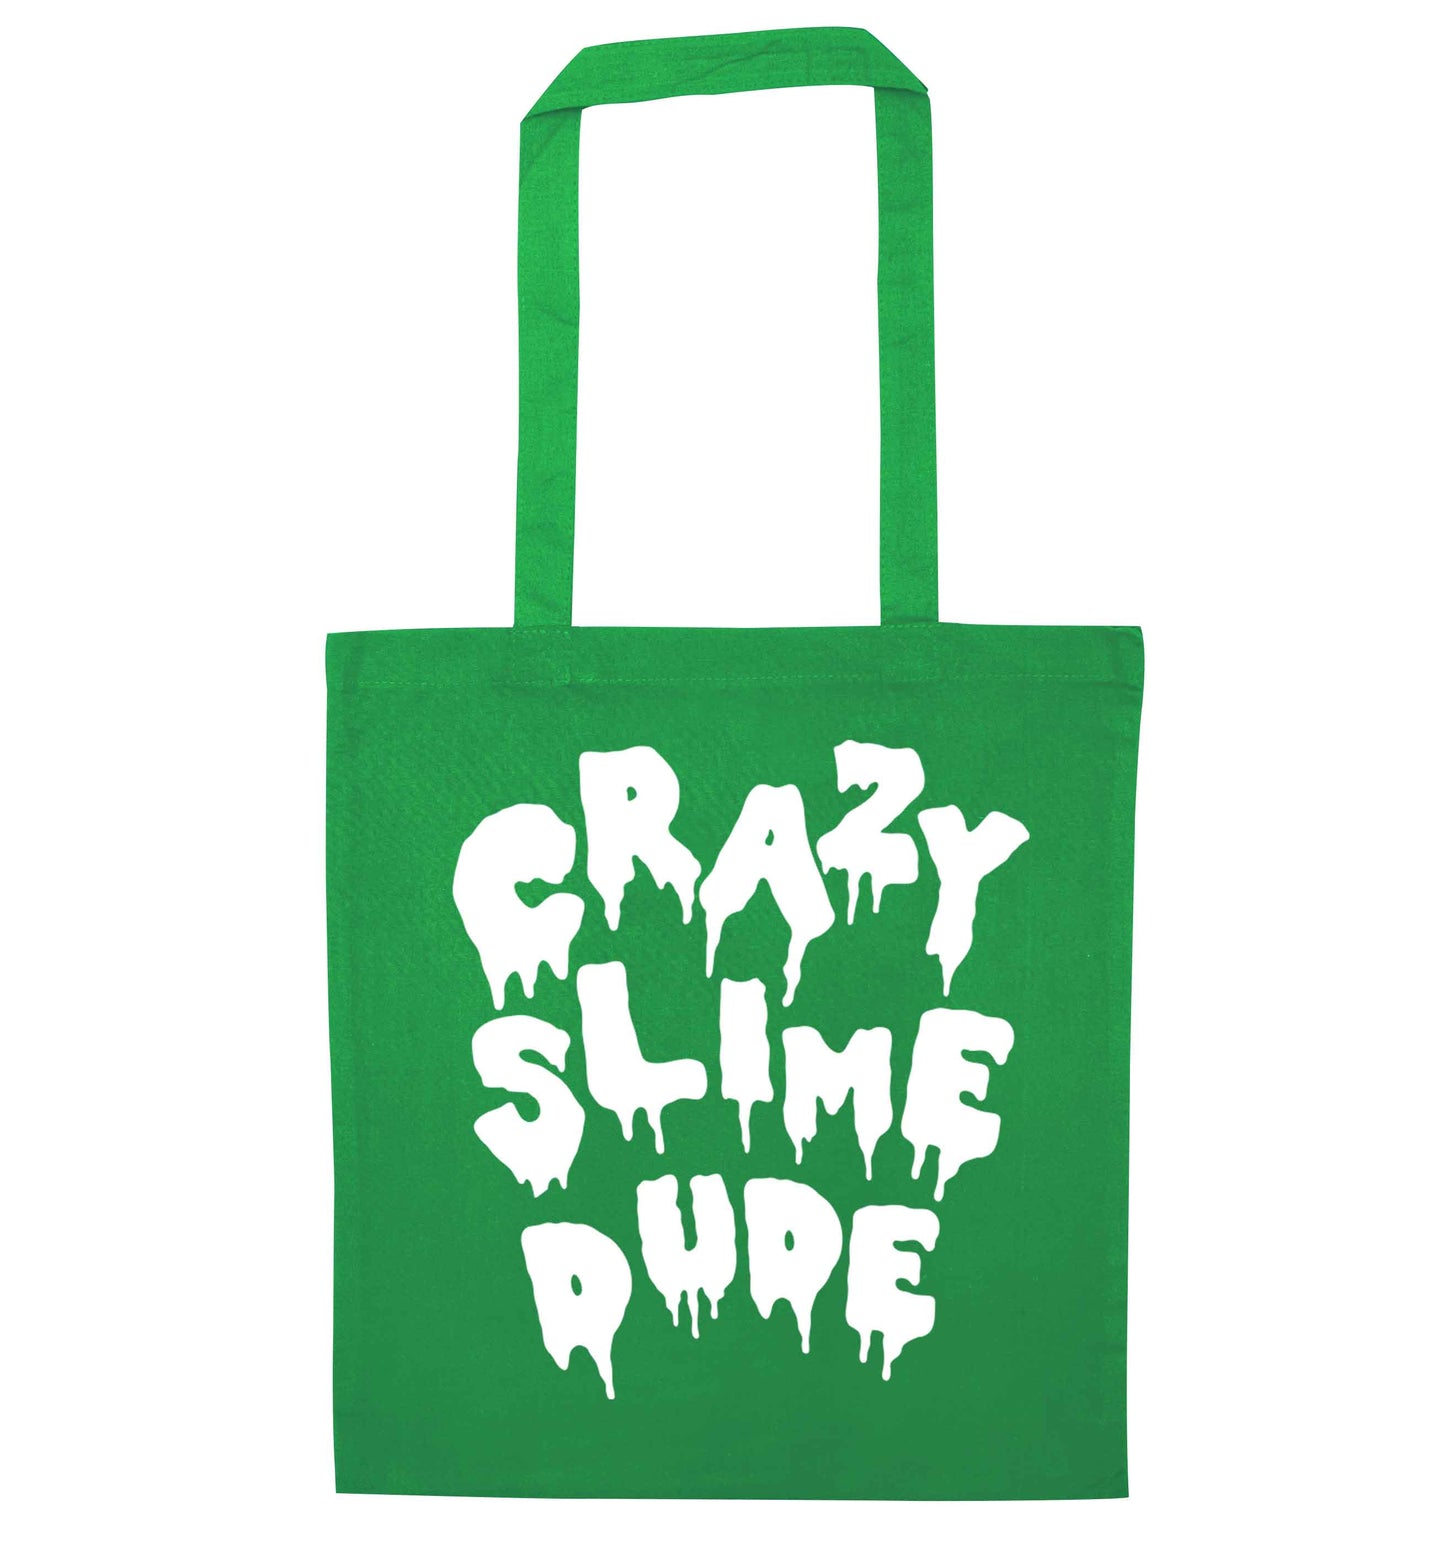 Crazy slime dude green tote bag